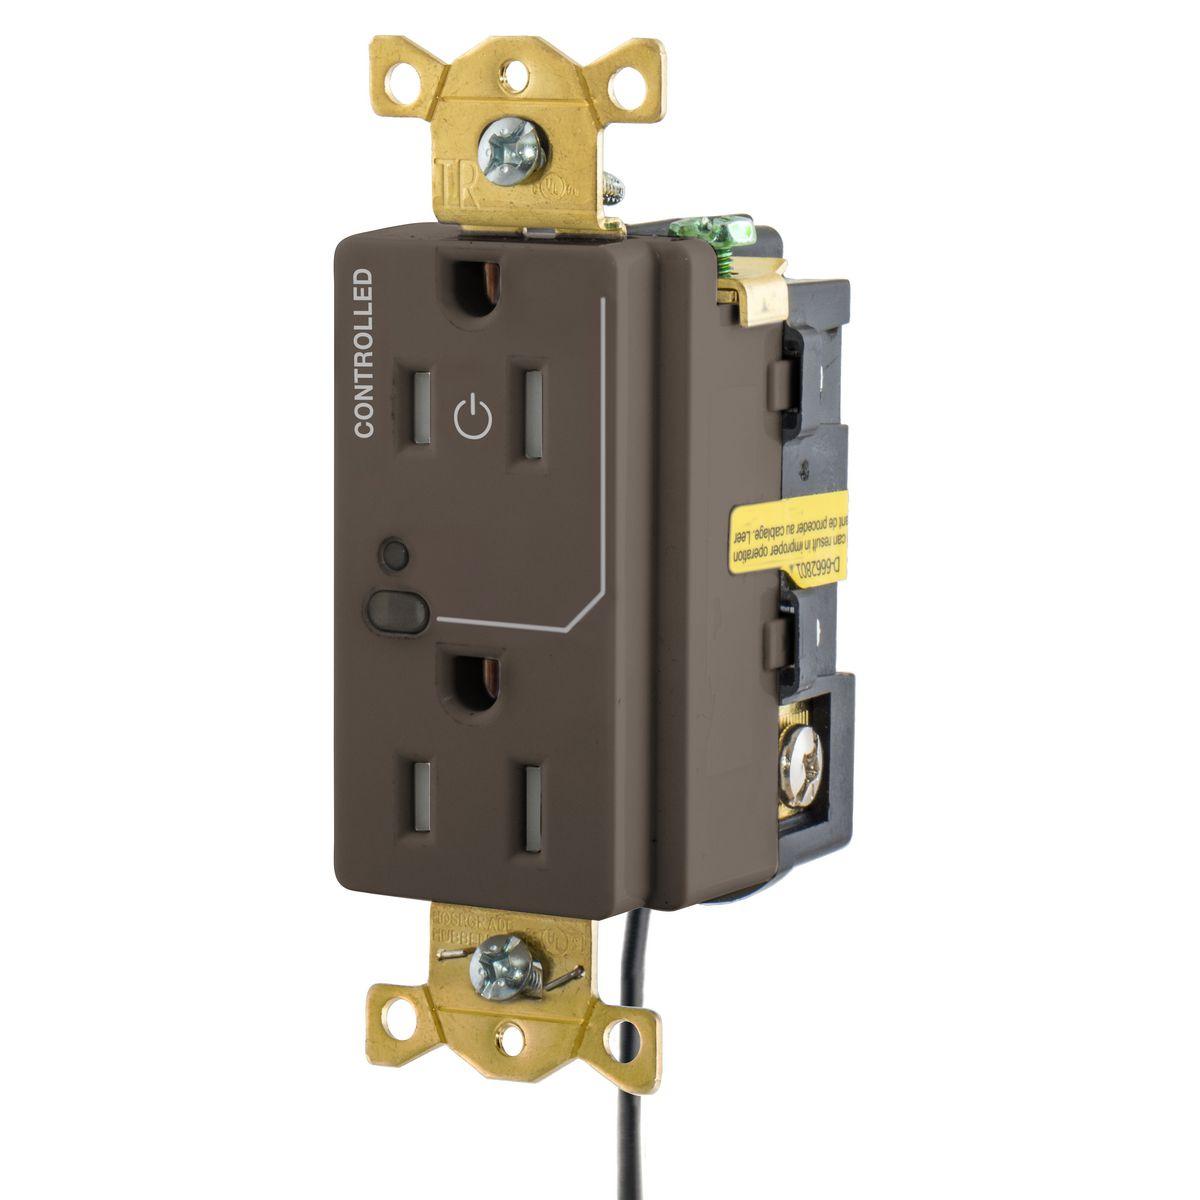 Hubbell HBL5262LC1 Straight Blade Devices, Logic Load Control Receptacles,Split Circuit , Industrial Grade, 15A 125V, 2-Pole 3-Wire Grounding, 5-15R, Brown.  ; Designed for Automatic Receptacle (plug load) Control ; Half controlled face and downstream control ; Low voltage 